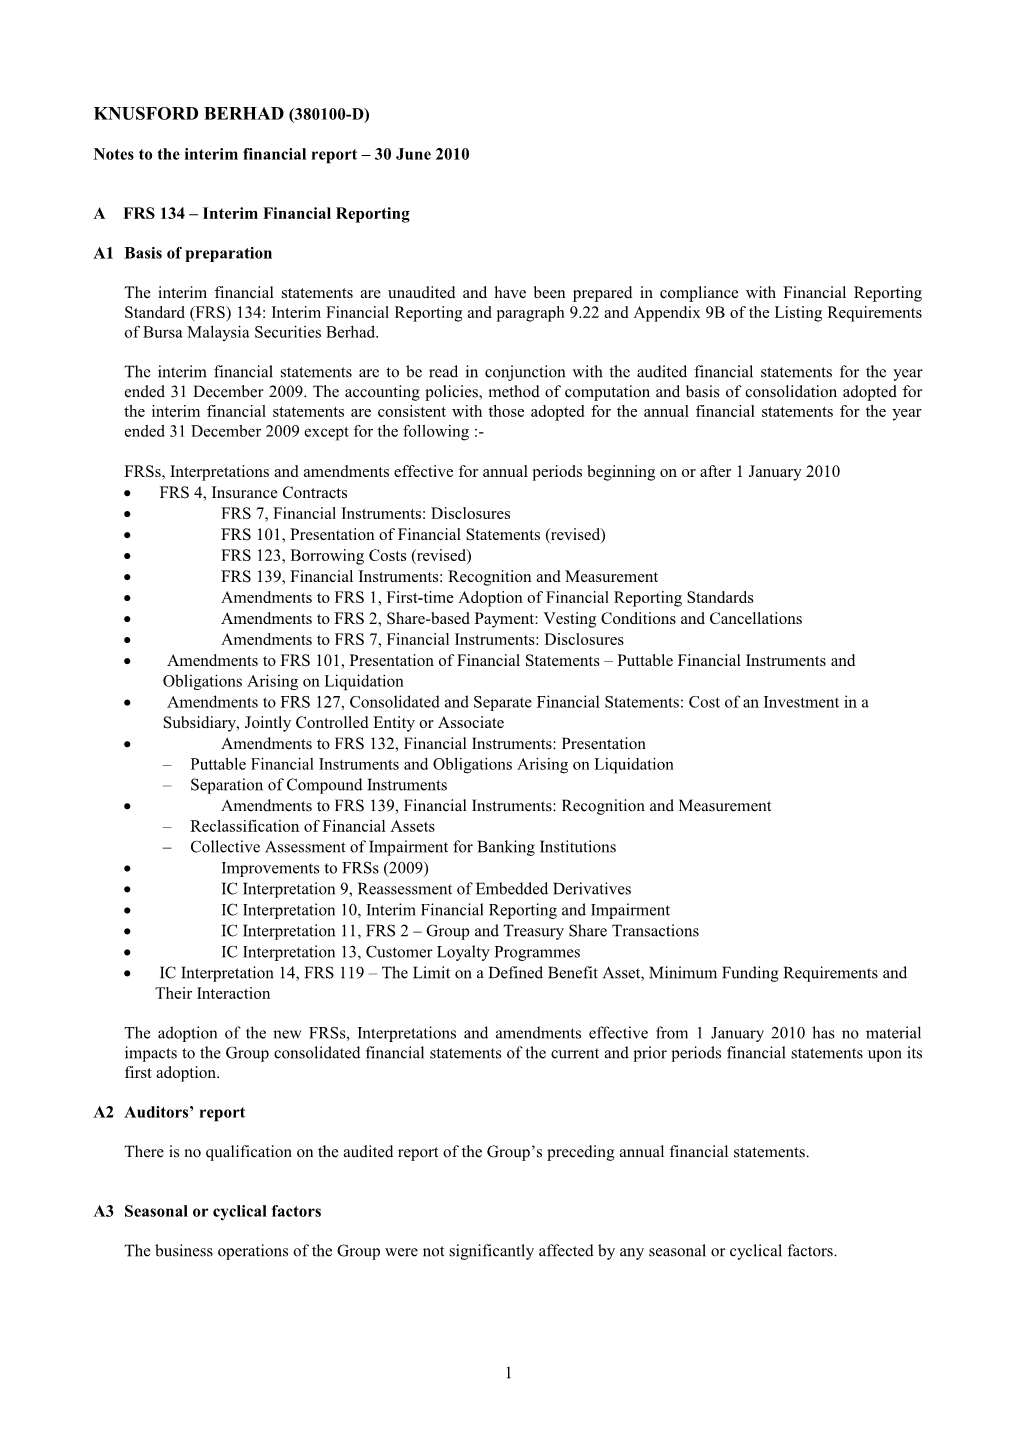 Notes to the Interim Financial Report 30June 2010